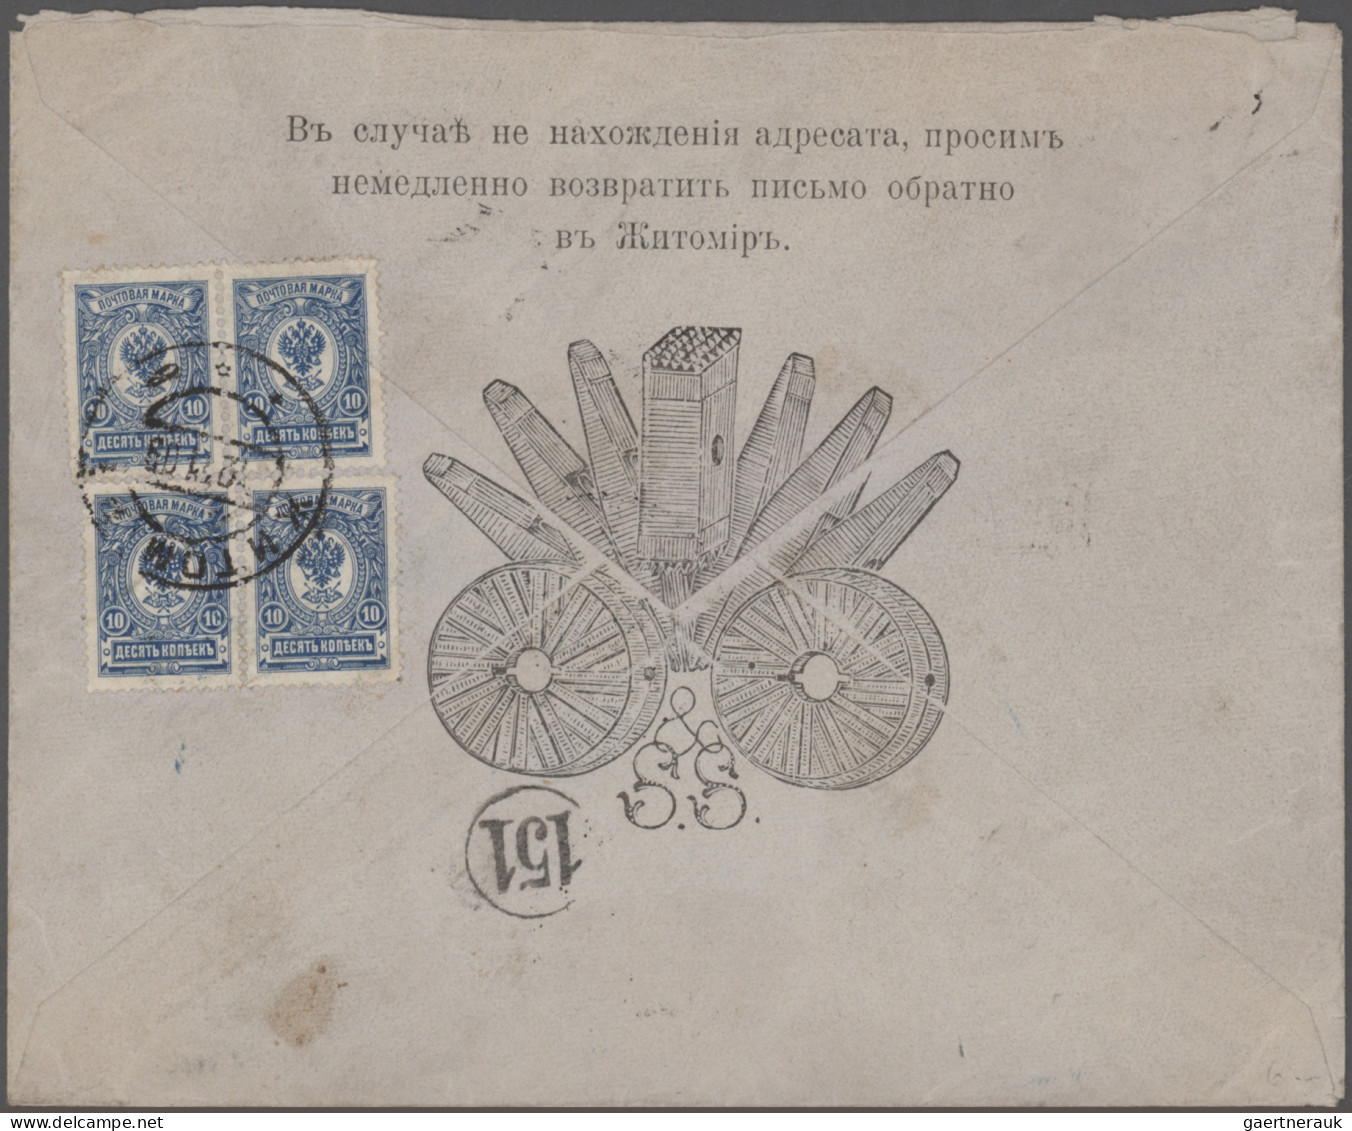 Russia: 1789-1917 More than 100 letters, covers and postcards, with several earl